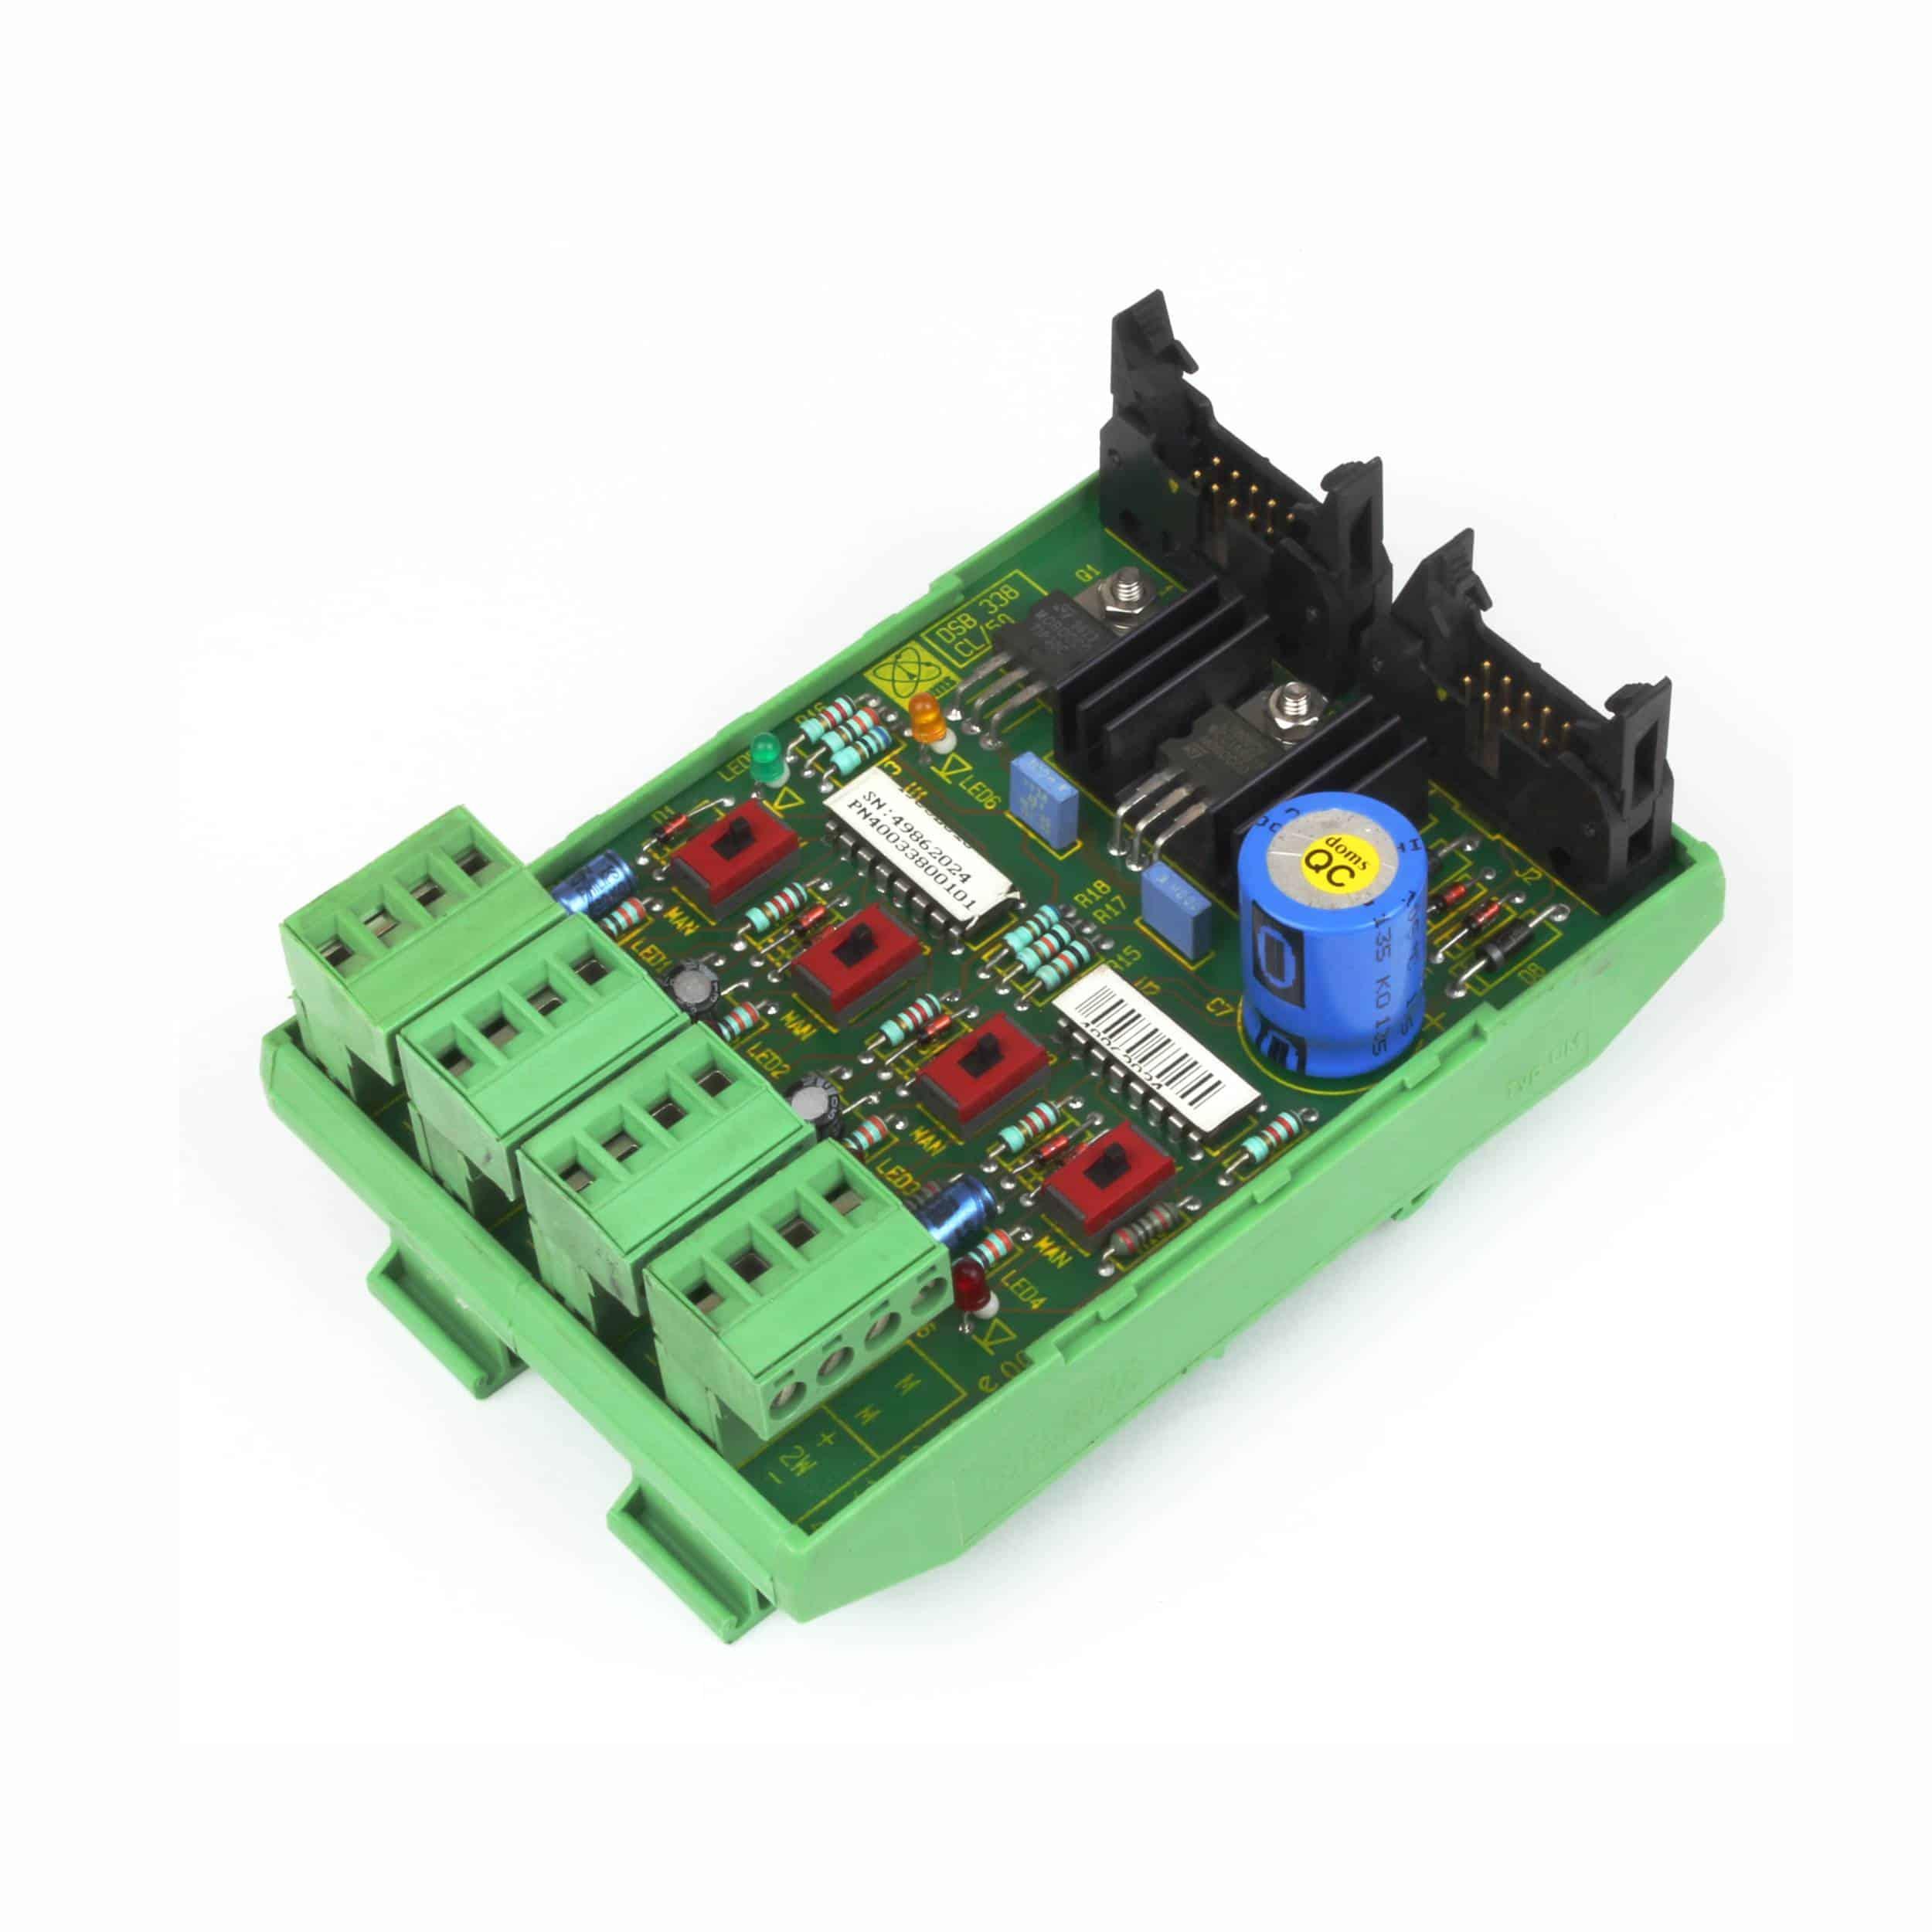 Product: Refurbished DOMS DSB338 - Levtech Service & Production